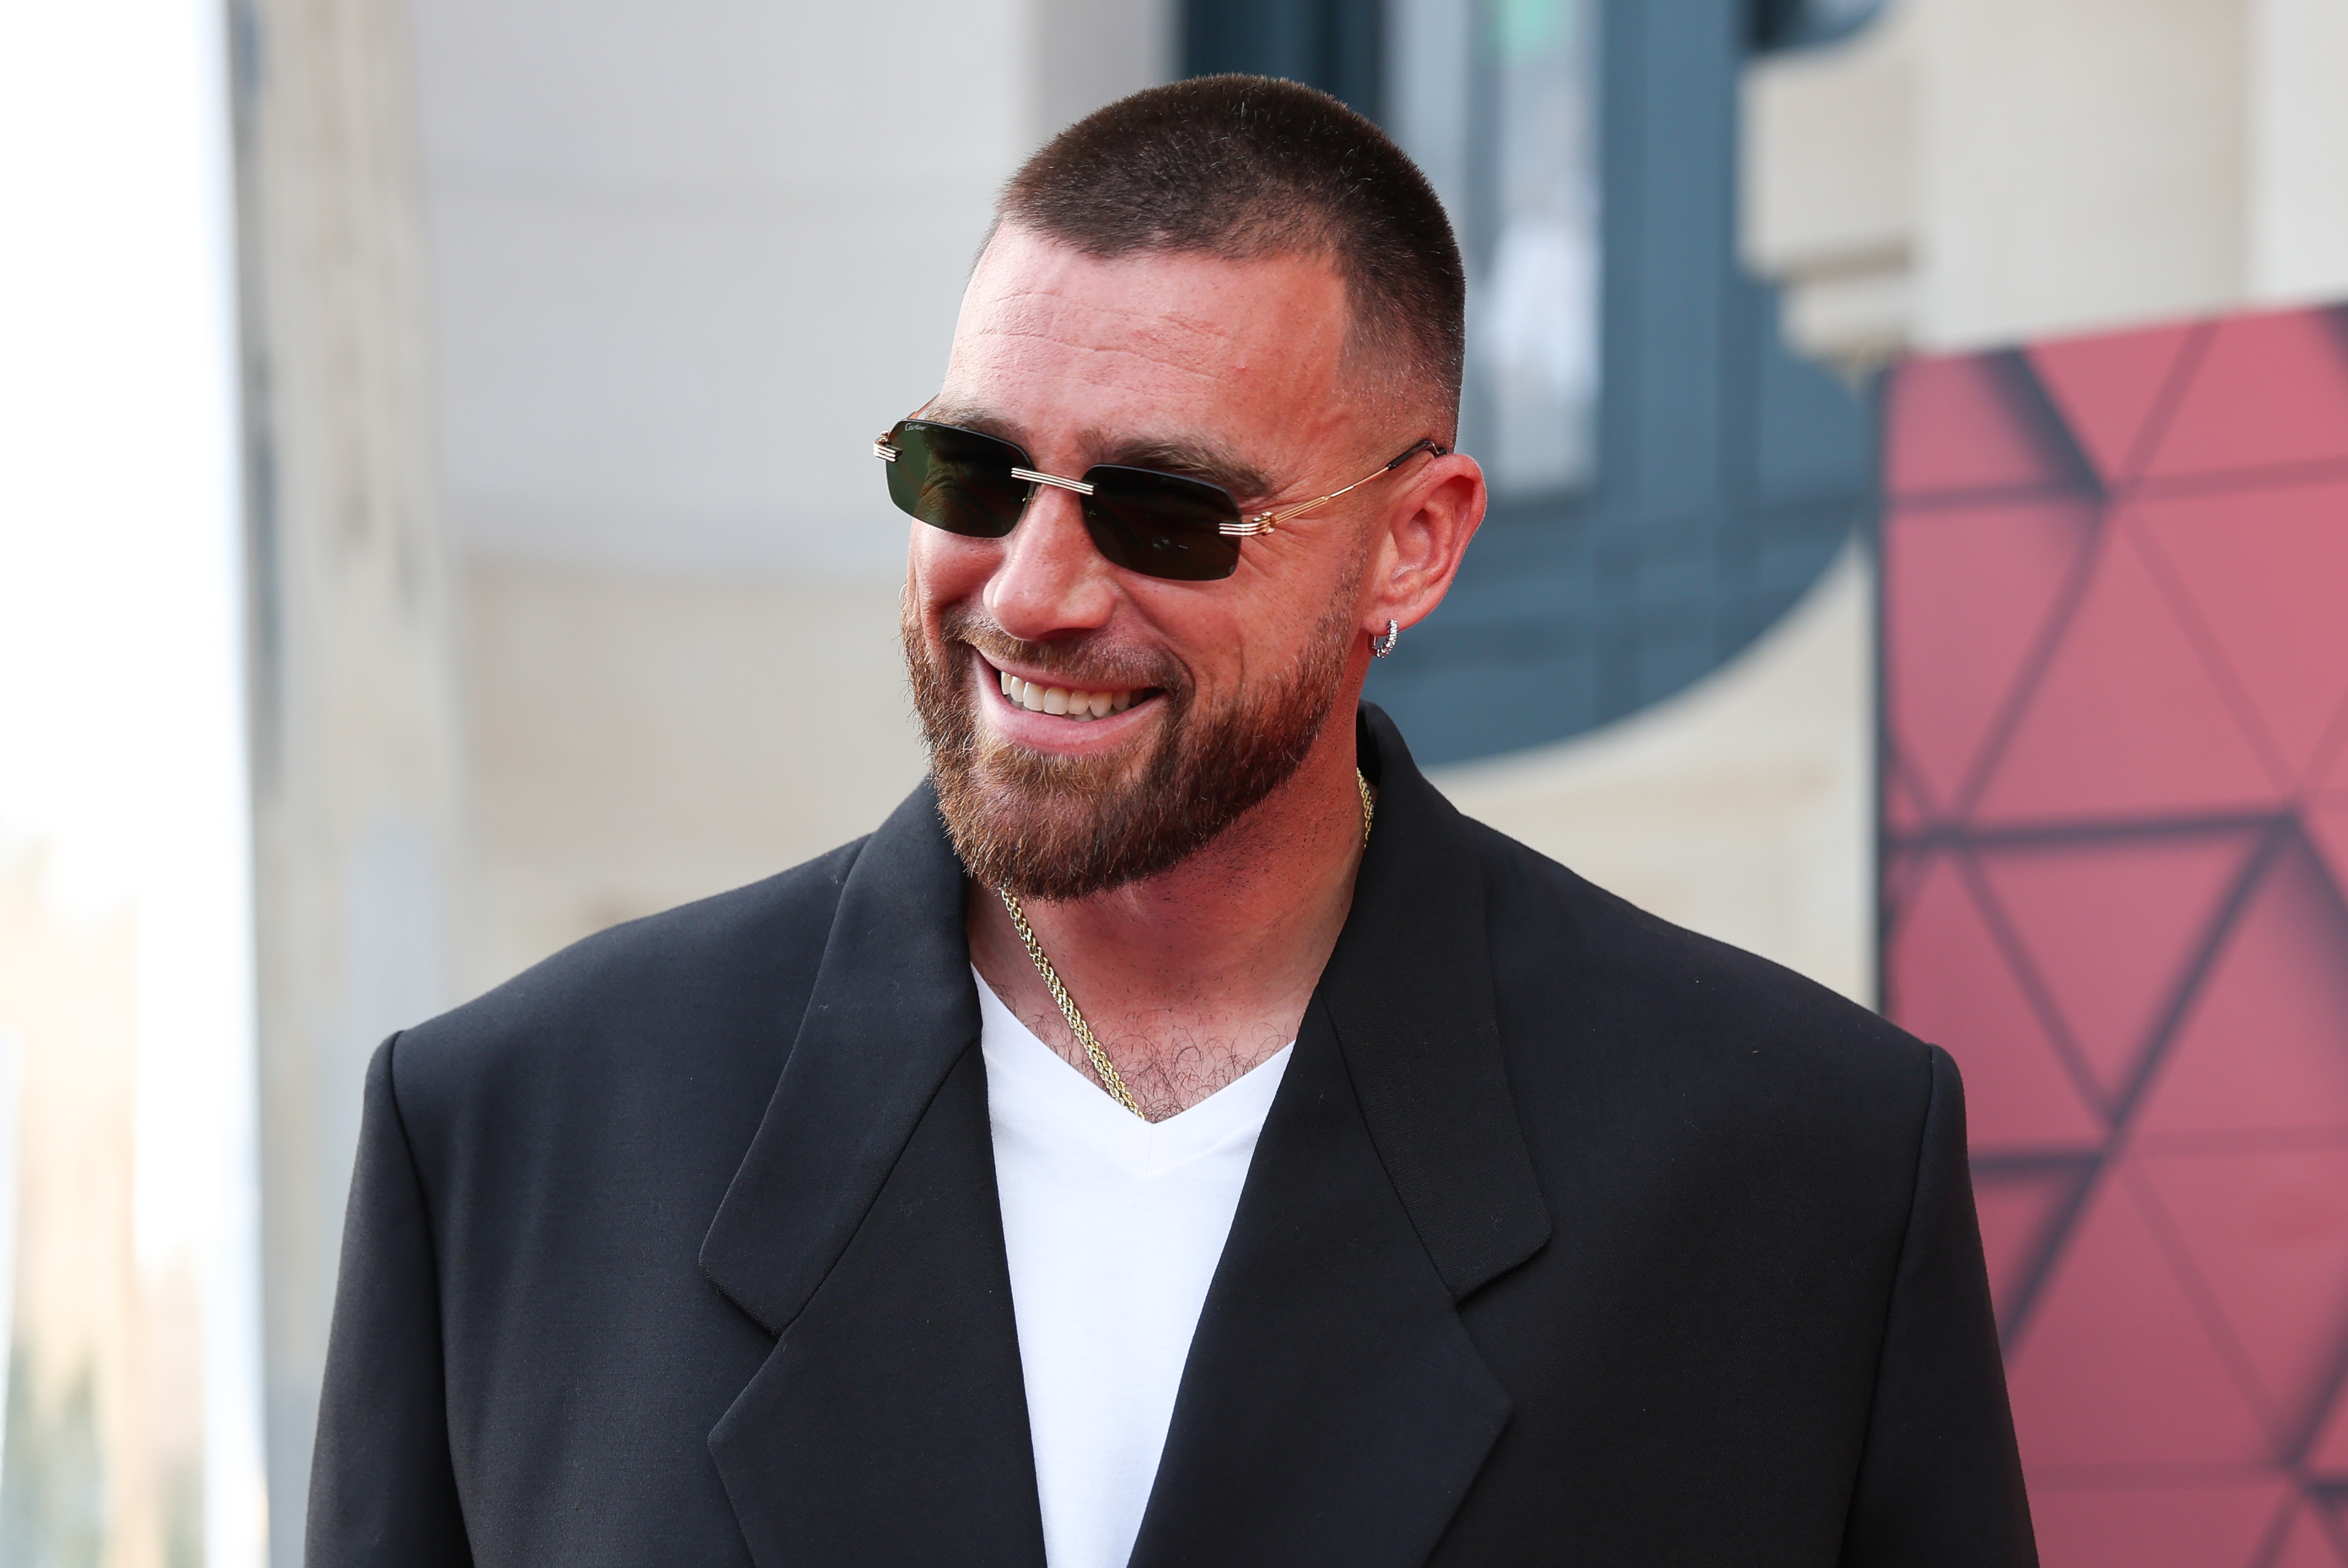 Close-up of Travis smiling and wearing sunglasses and a suit